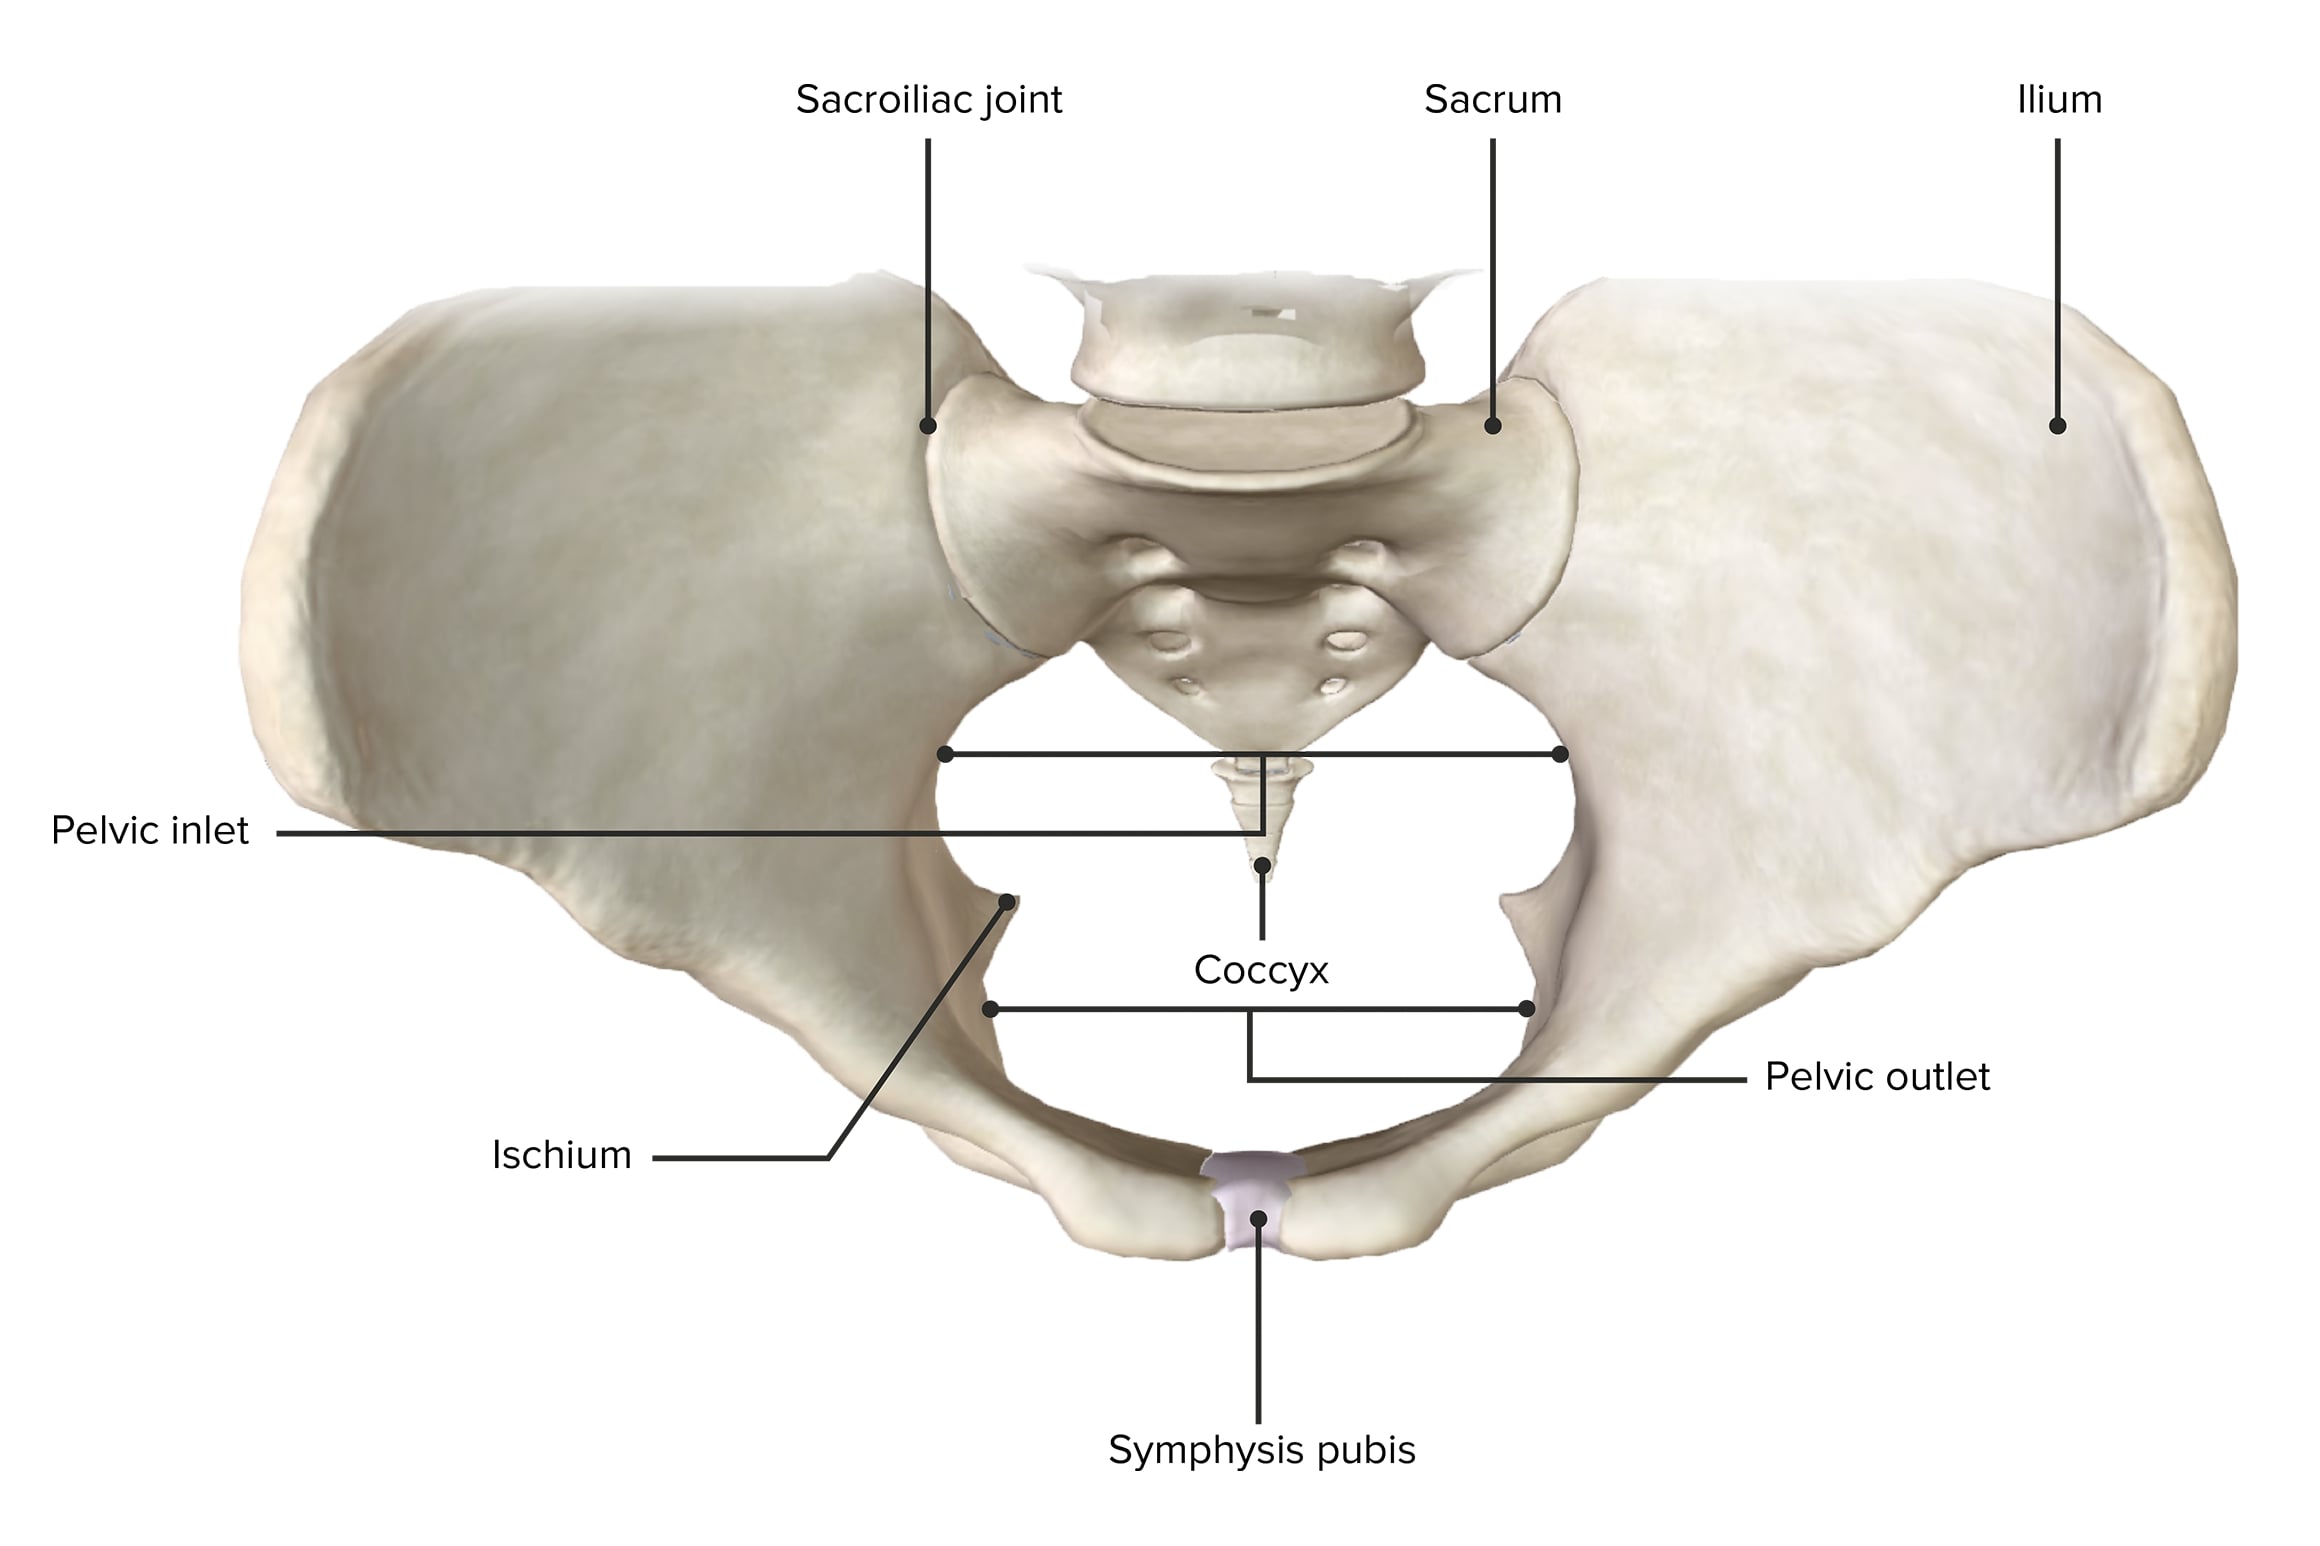 Anatomy of the Pelvis in Obstetrics (Chapter 3) - Part 1 MRCOG